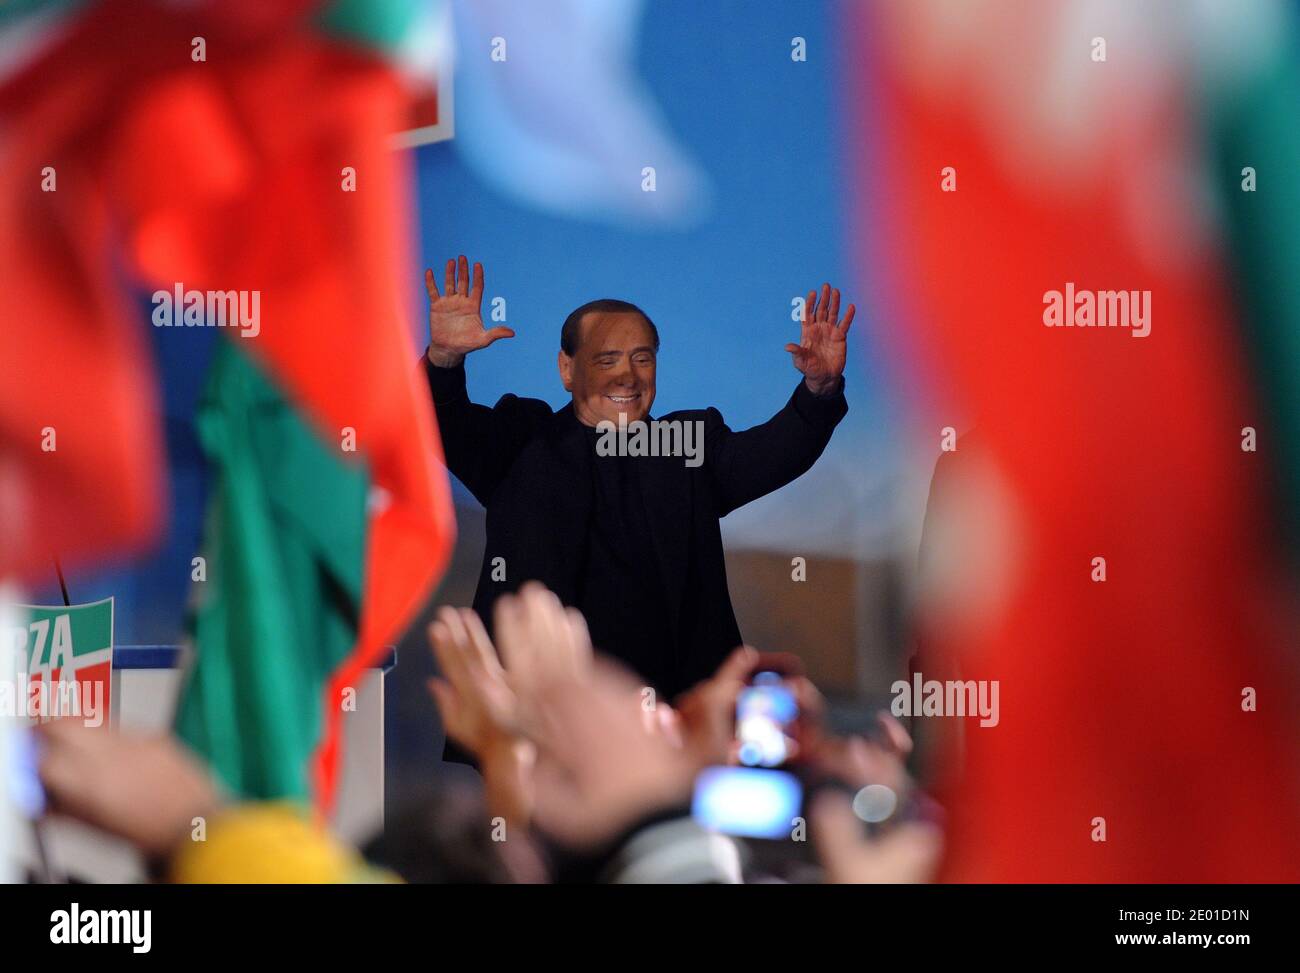 Italy's former Prime Minister Silvio Berlusconi delivers a speech to supporters outside his private residence, the Palazzo Grazioli, on November 27, 2013 in Rome, Italy just after the Italian Senate voted to expel him from parliament after his conviction for tax fraud. Photo by Eric Vandeville/ABACAPRESS.COM Stock Photo